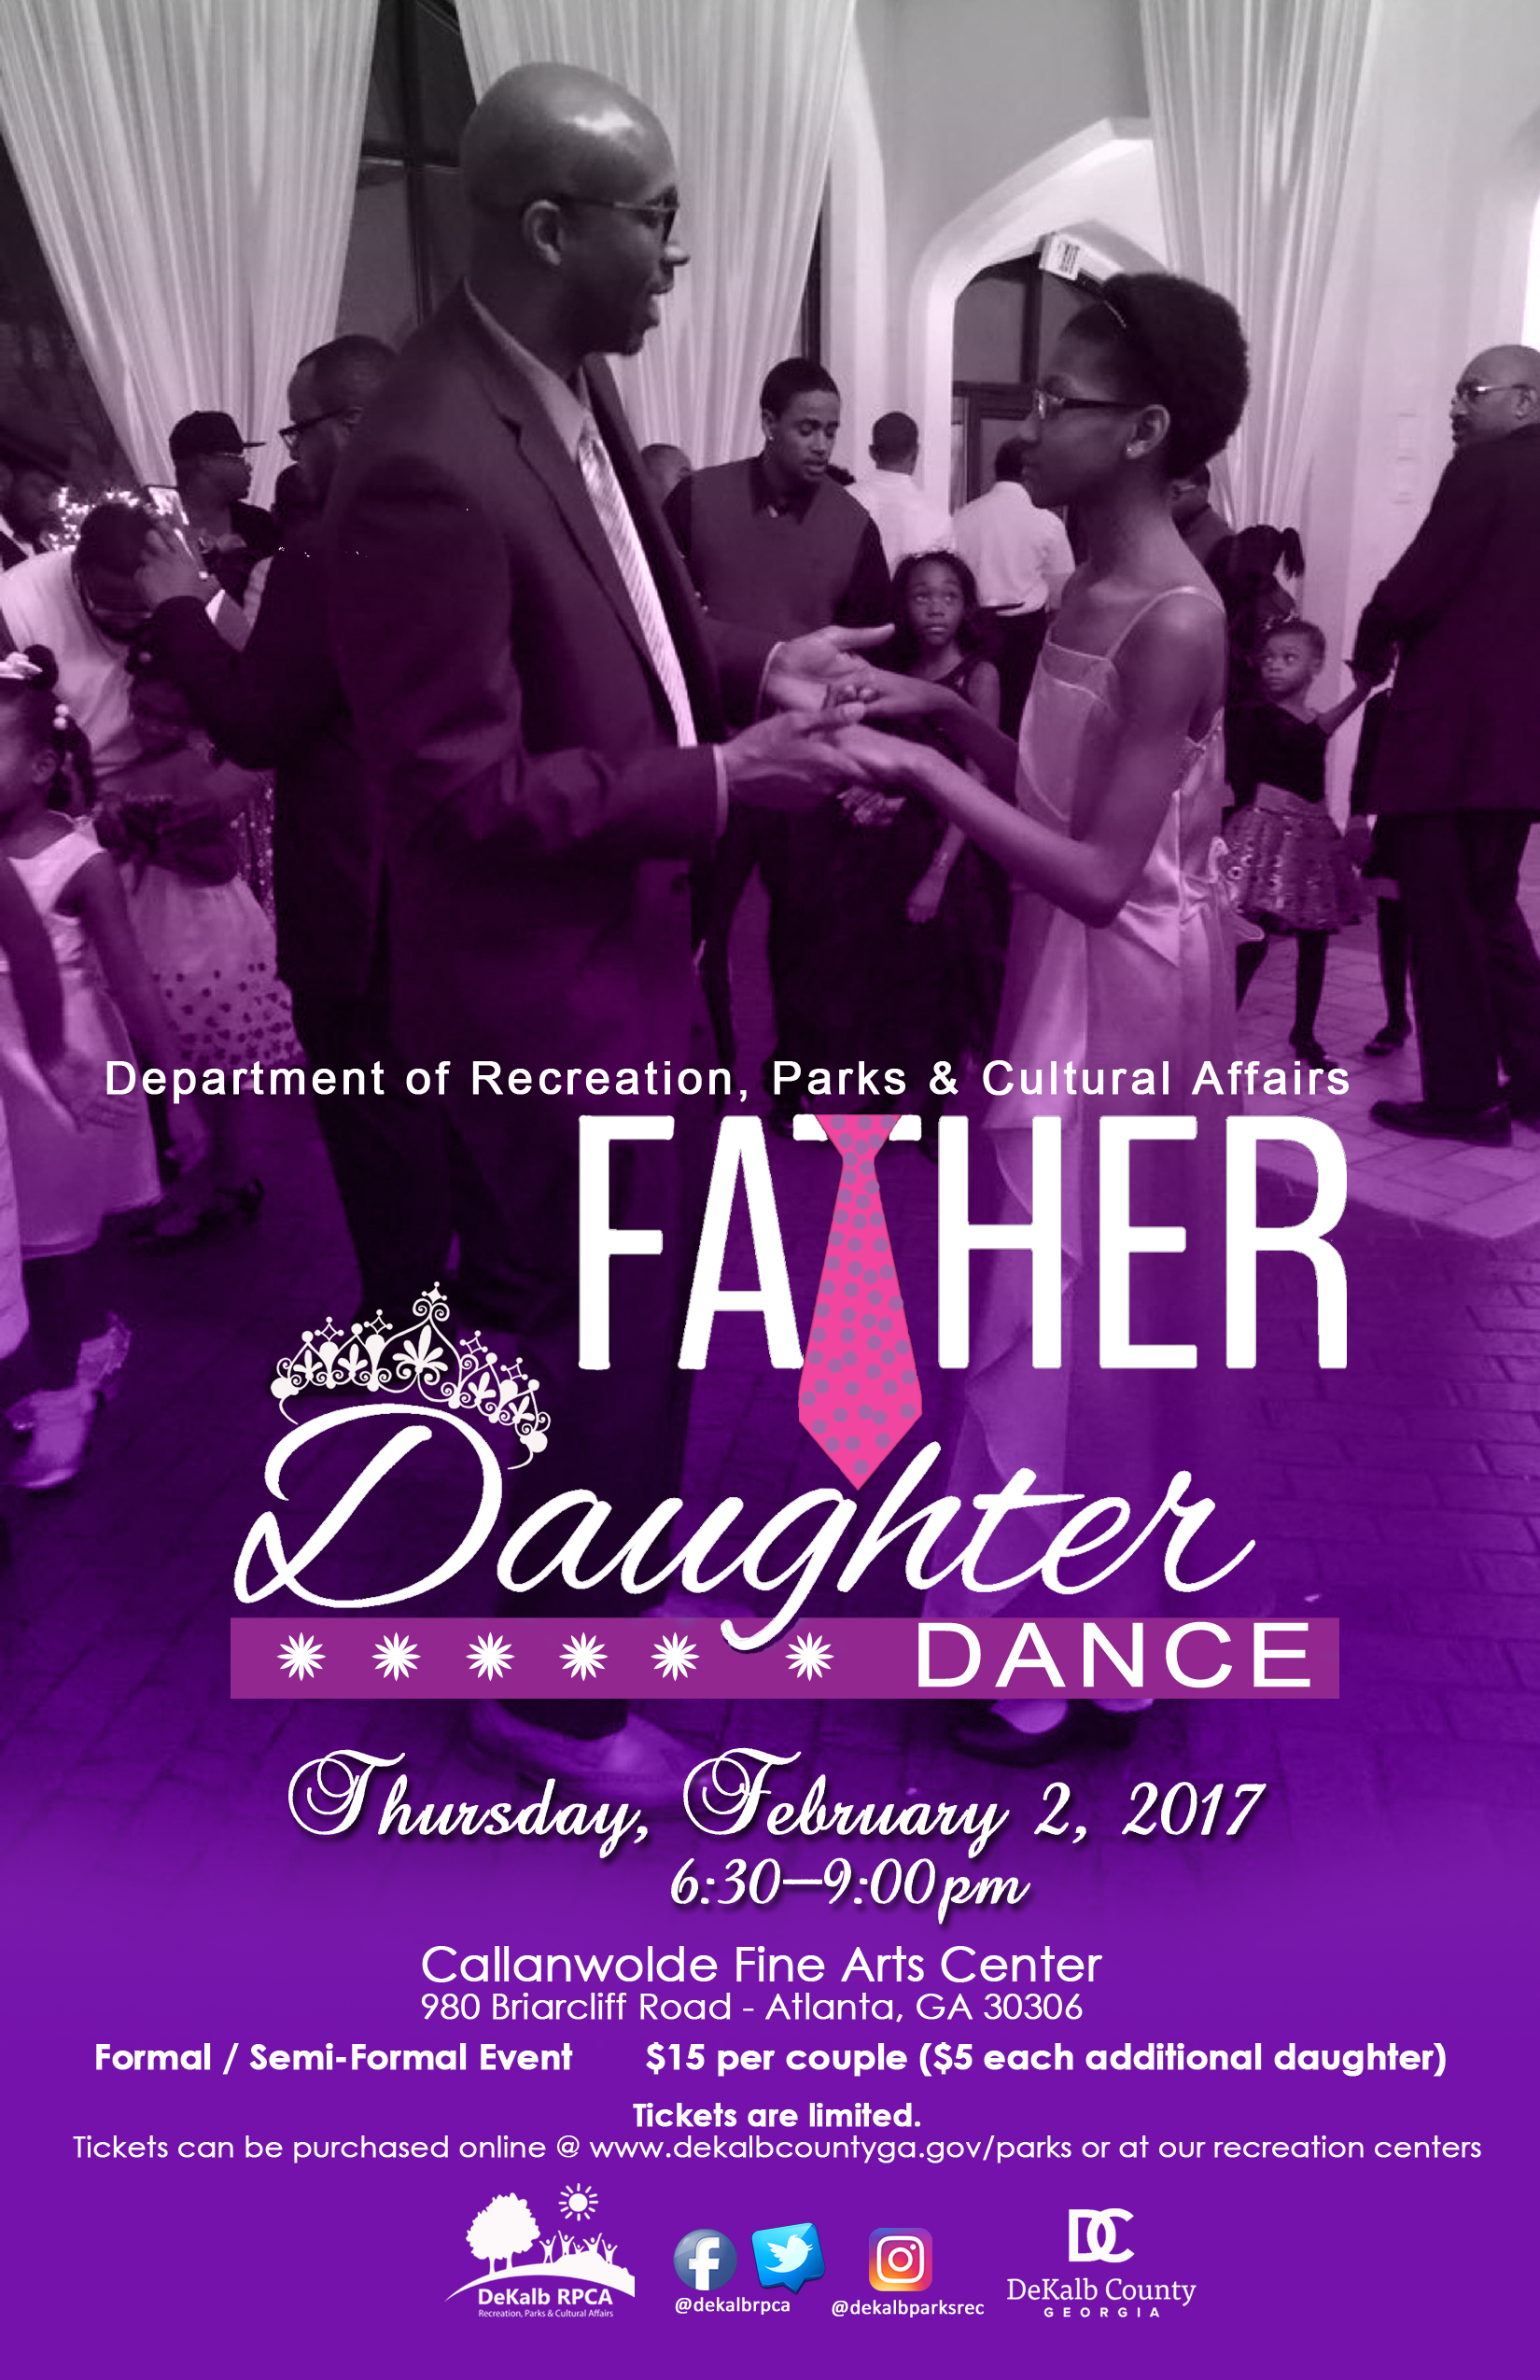 DeKalb County Recreation, Parks and Cultural Affairs to host Father-Daughter Dance 